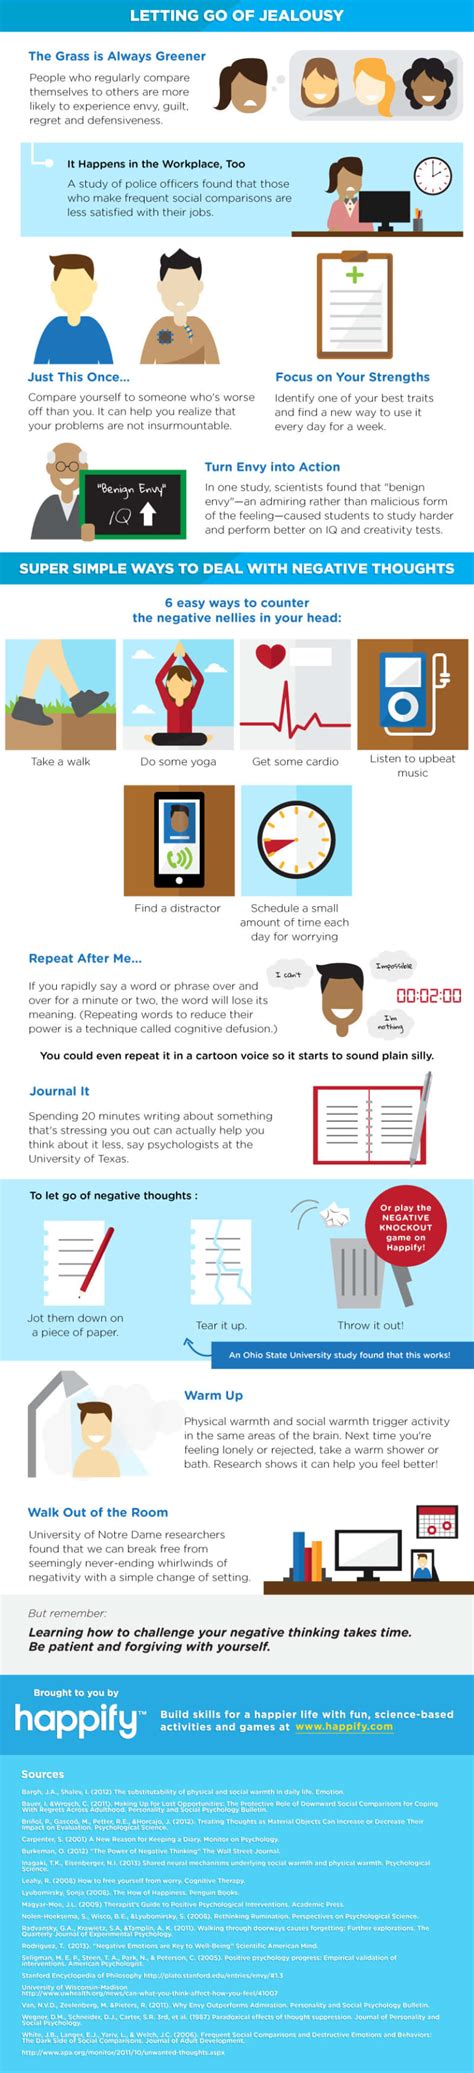 how to stop negative thoughts from getting you down infographic